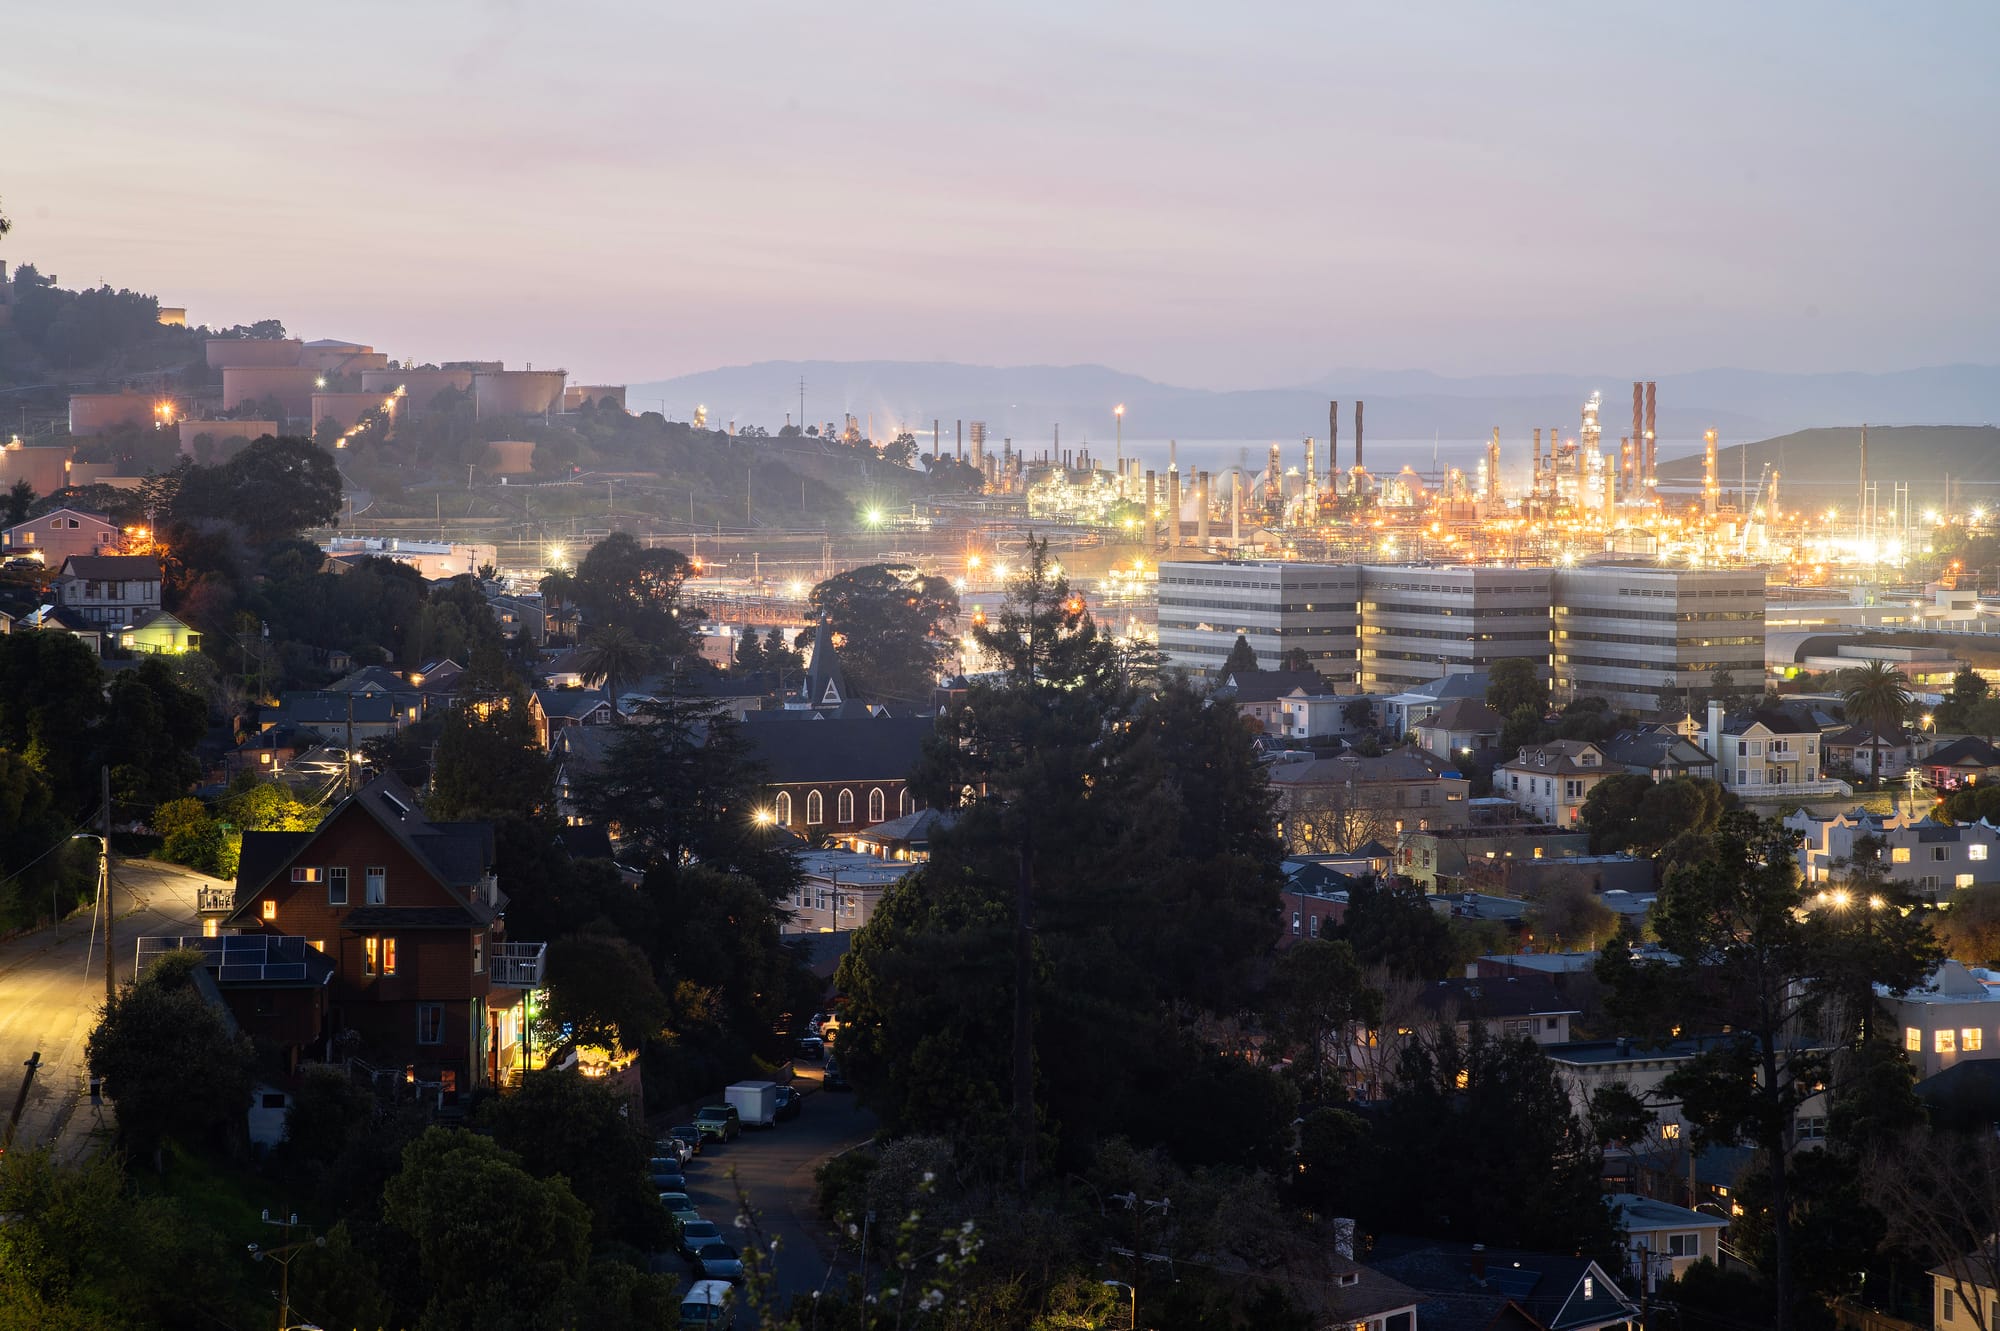 Chevron owns this city’s news site. Many stories aren’t told.